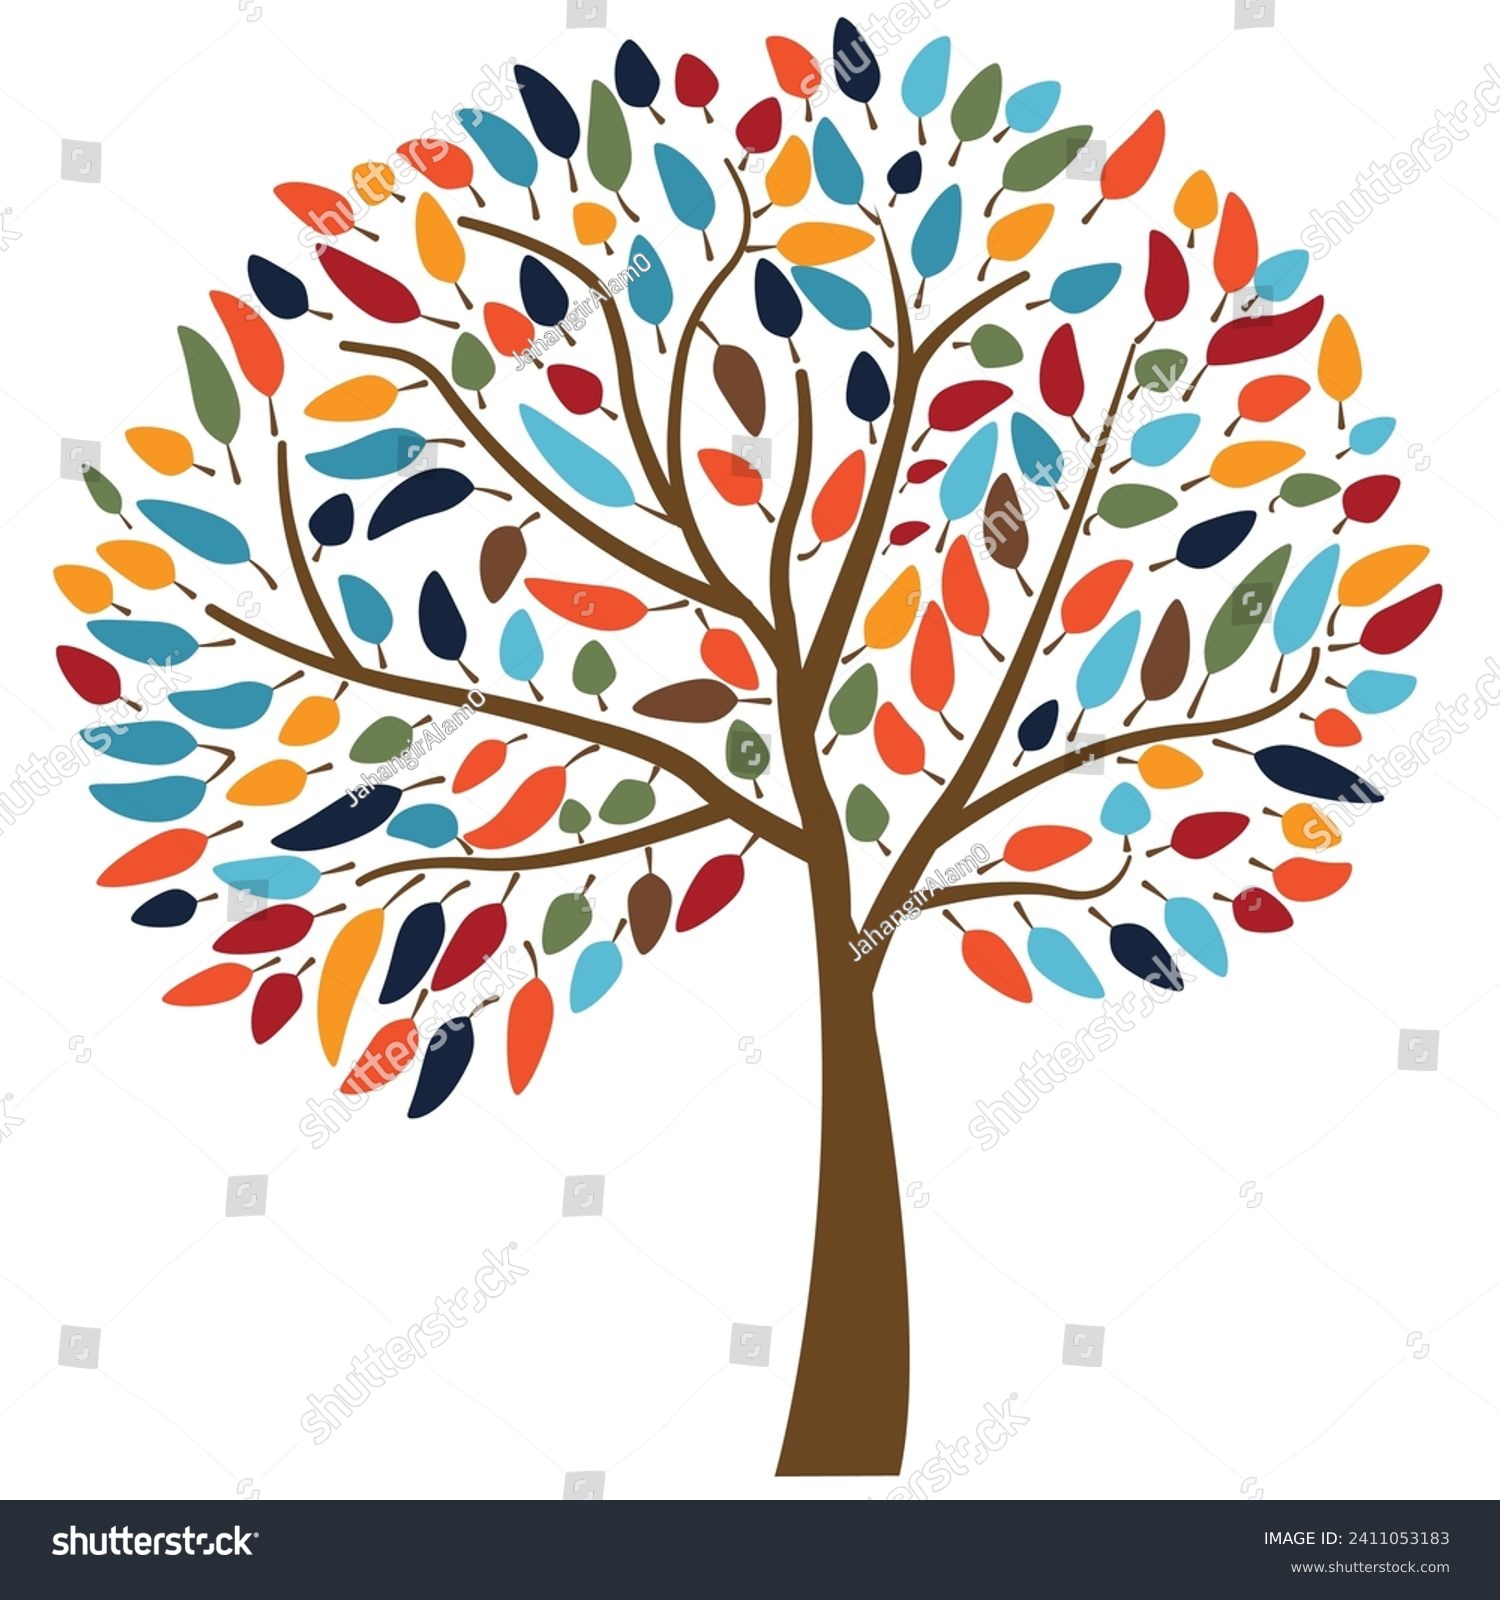 SVG of colorful tree with vibrant leaves hanging branches white background svg